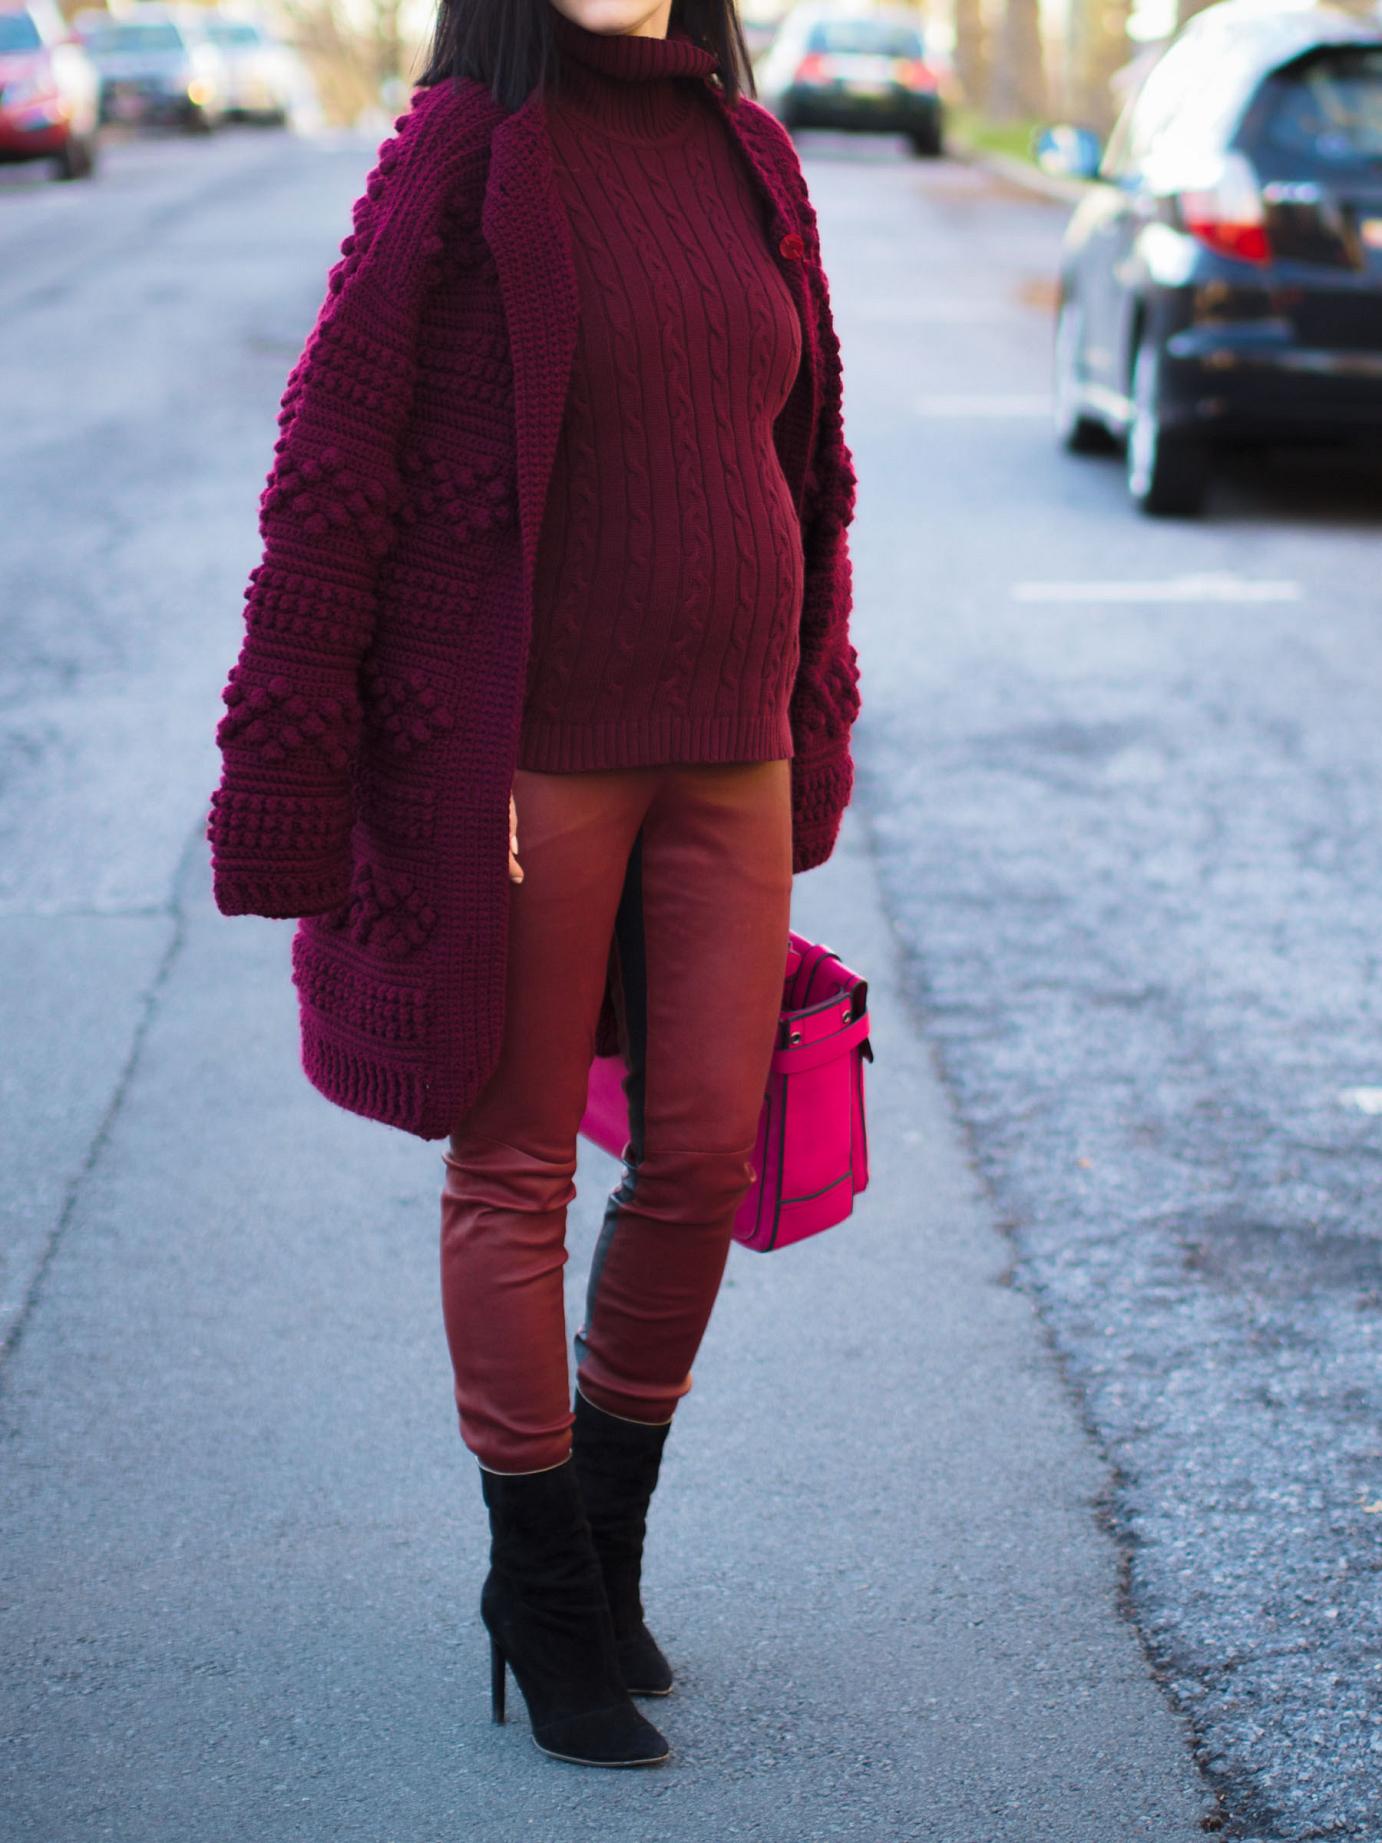 bittersweet colours, street style, winter trends, burgundy cardigan, vintage, burgundy color, monochrome look, reed krakoff bag, A.L.C pants, leather pants, maternity style, 30 weeks